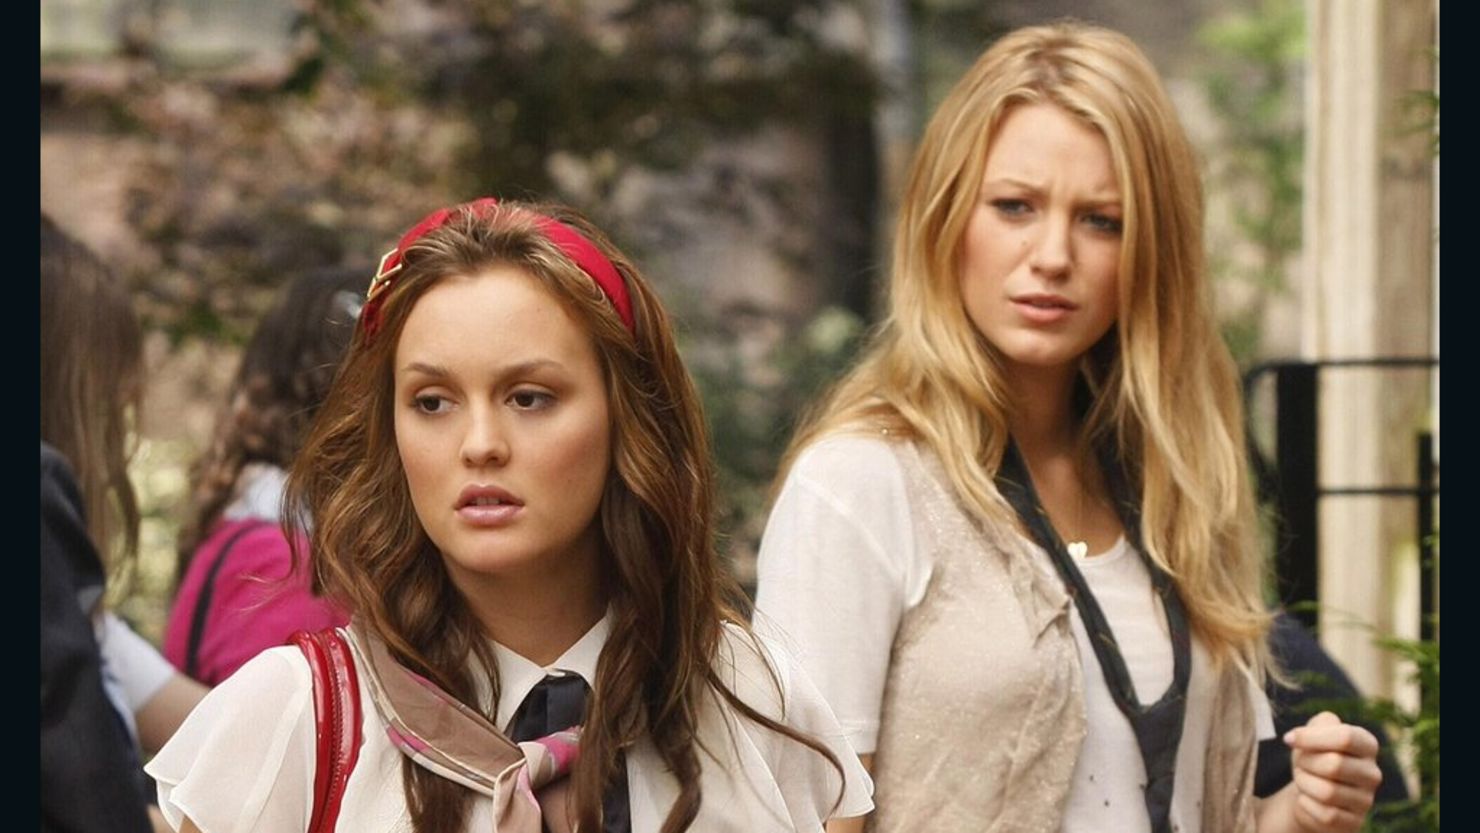 Gossip Girl': HBO Max reboot canceled after 2 seasons 